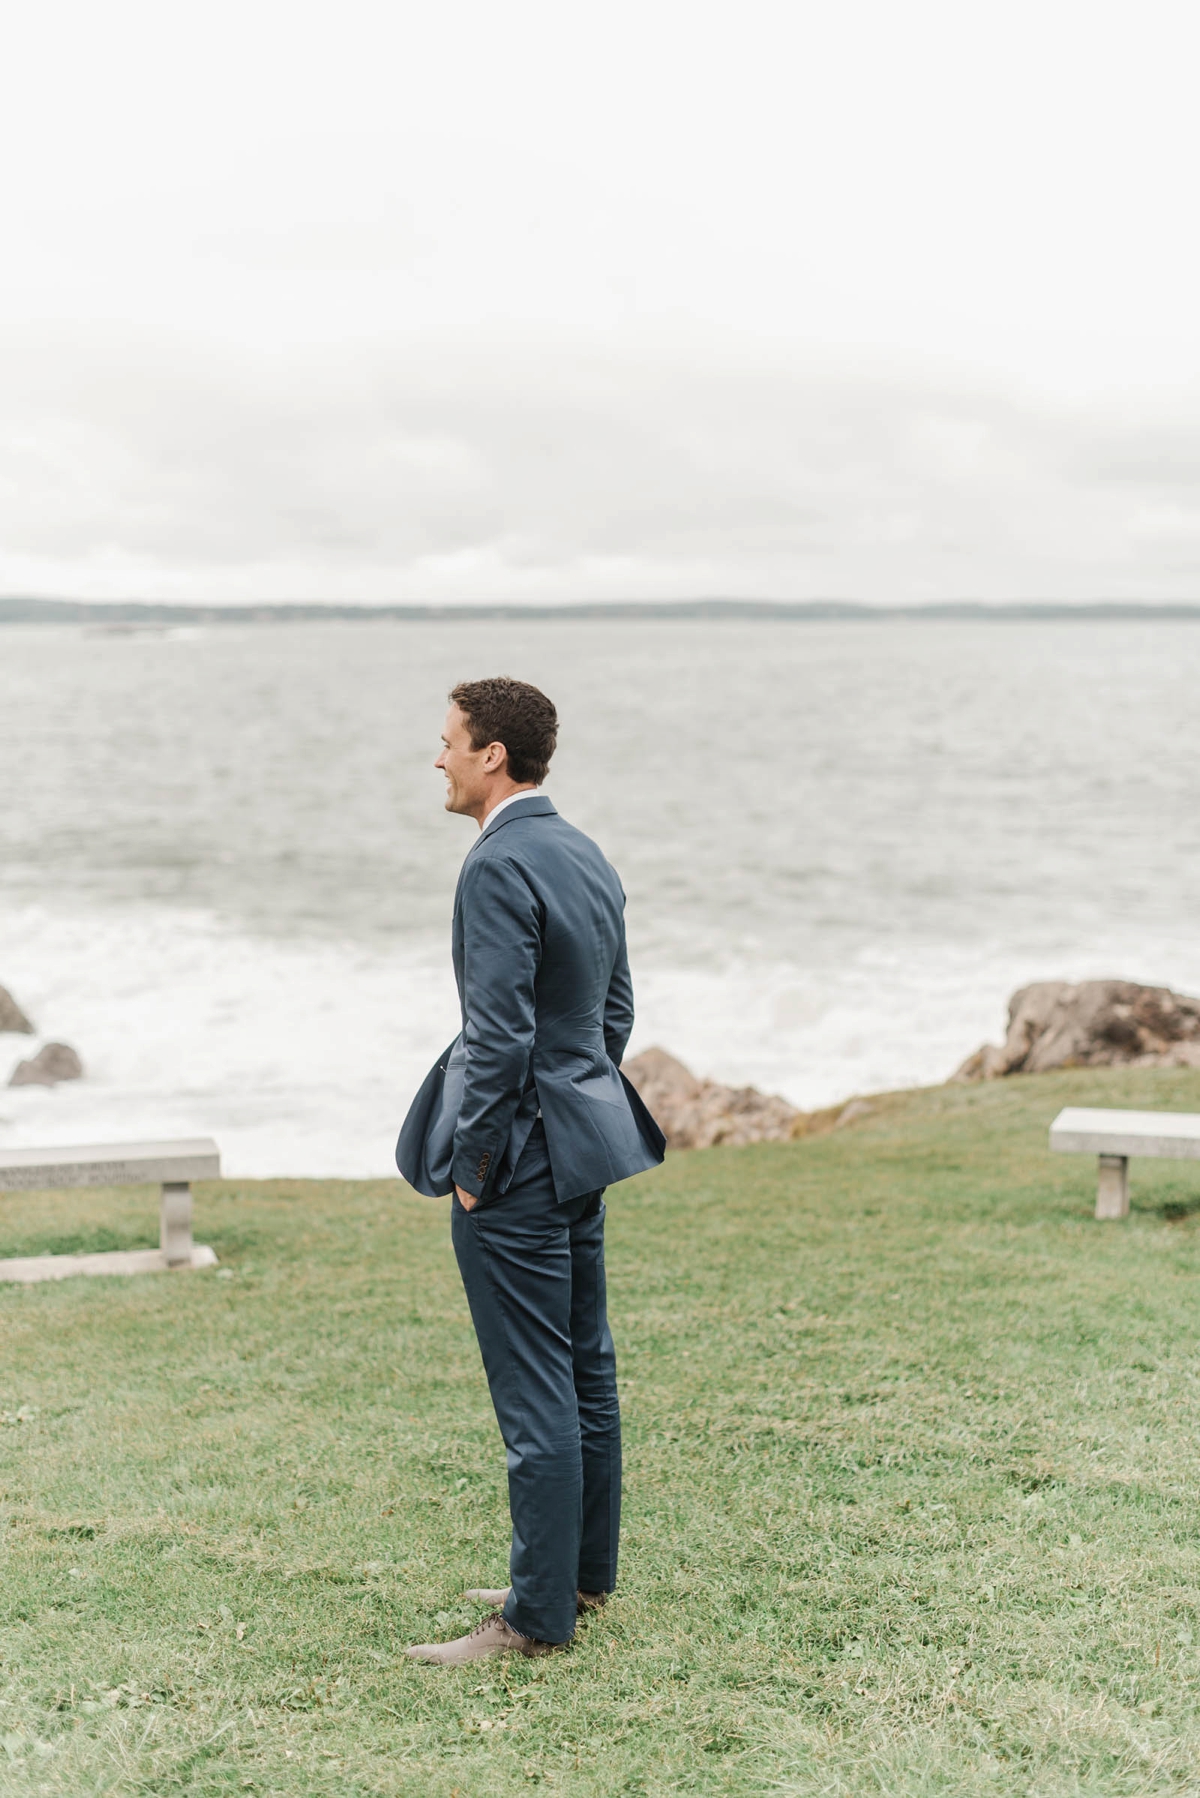 A cloudy fall wedding at the Eastern Yacht Club in Marblehead, MA shot by Boston Wedding Photographer Annmarie Swift